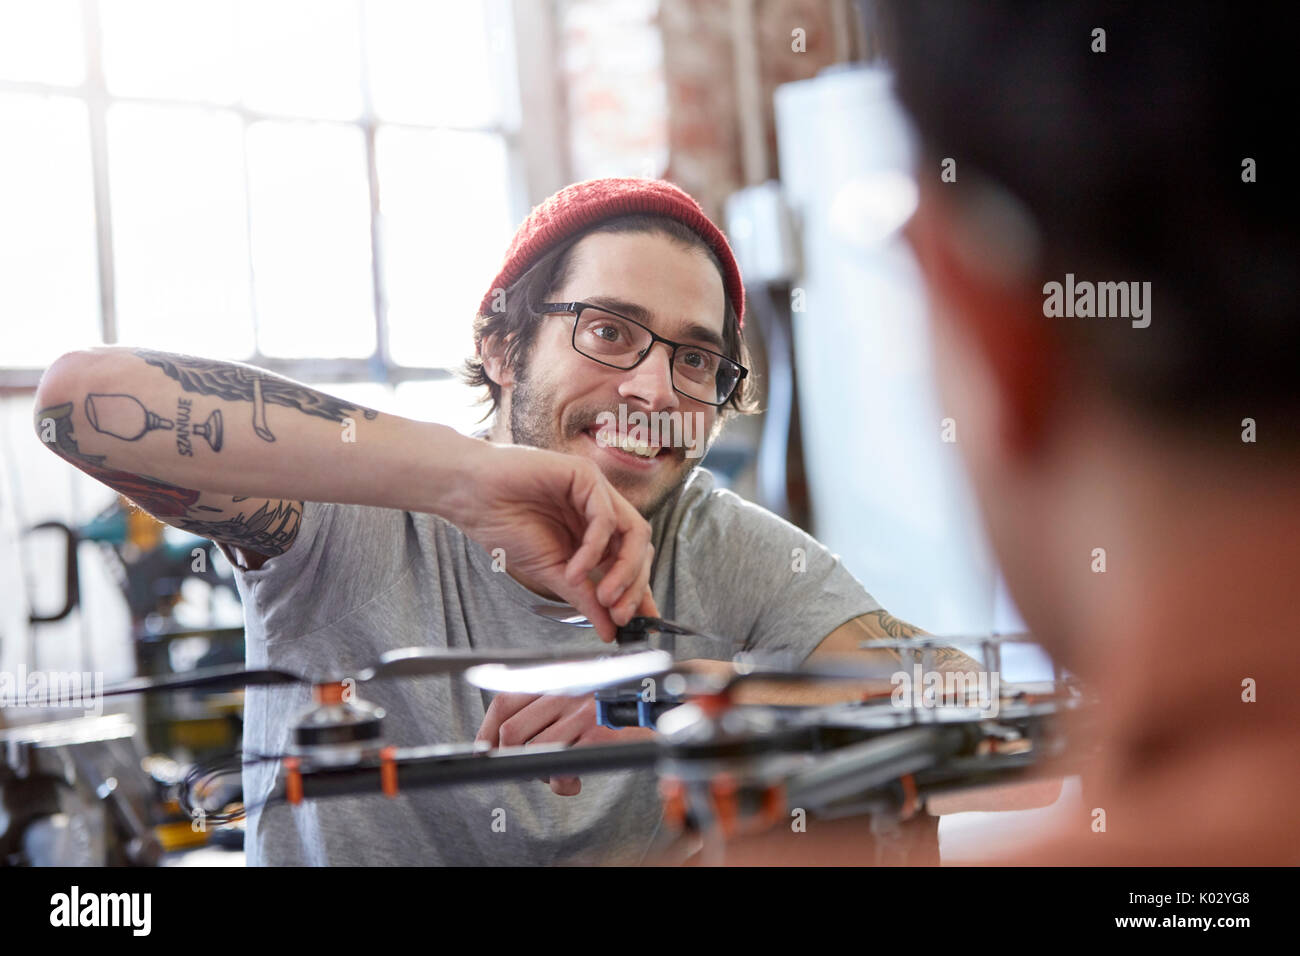 Smiling male designer with tattoos assembling drone Stock Photo